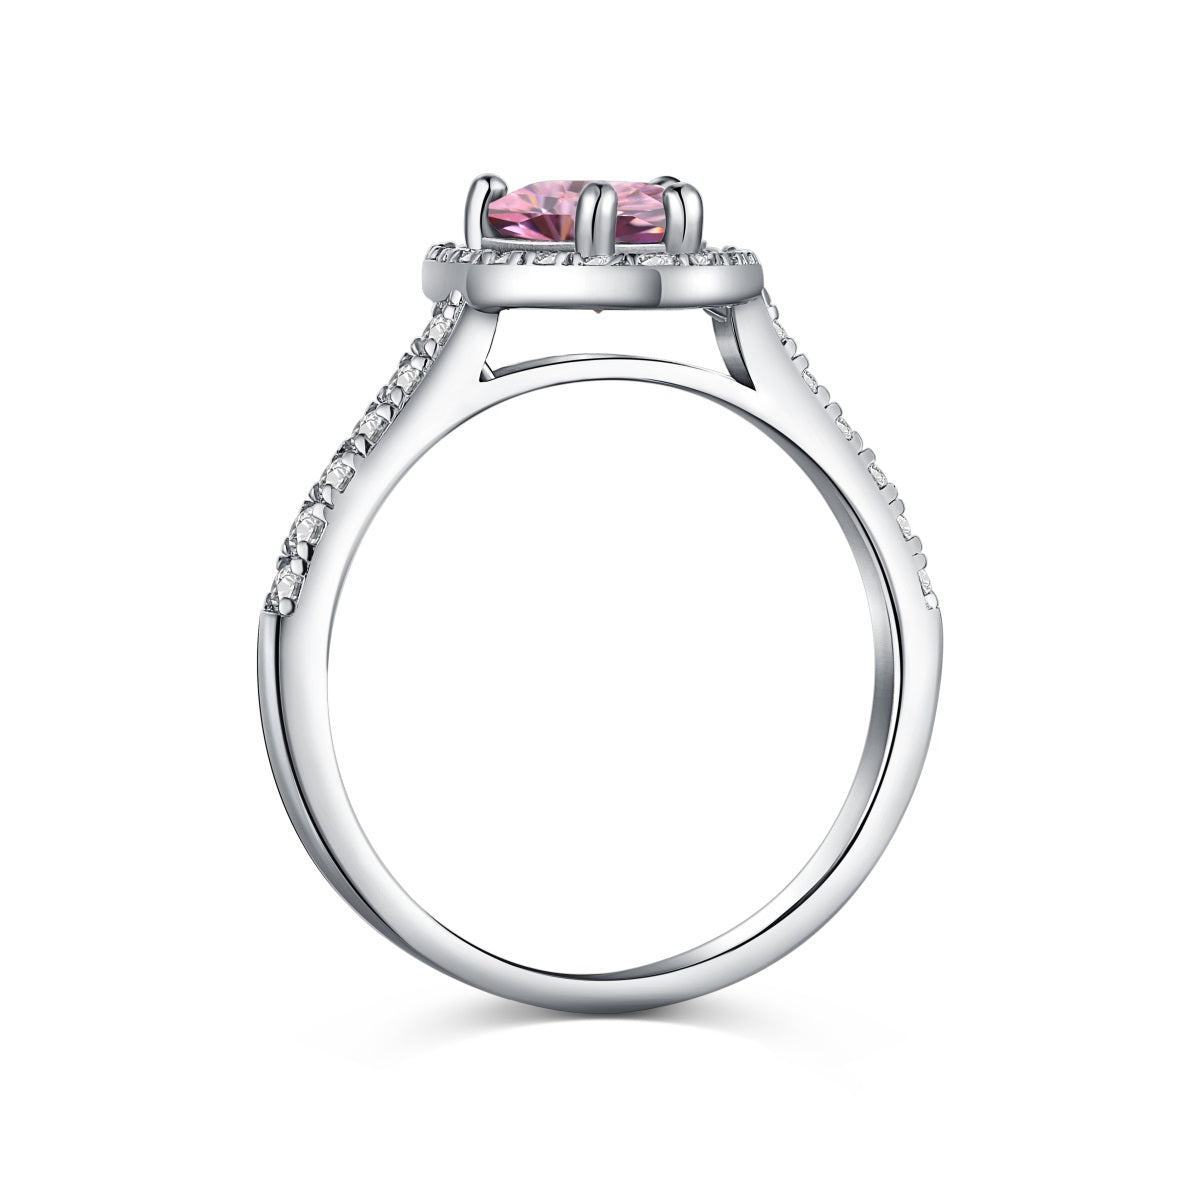 1.0 ct Heart Shape 5A CZ - Jodie Ring